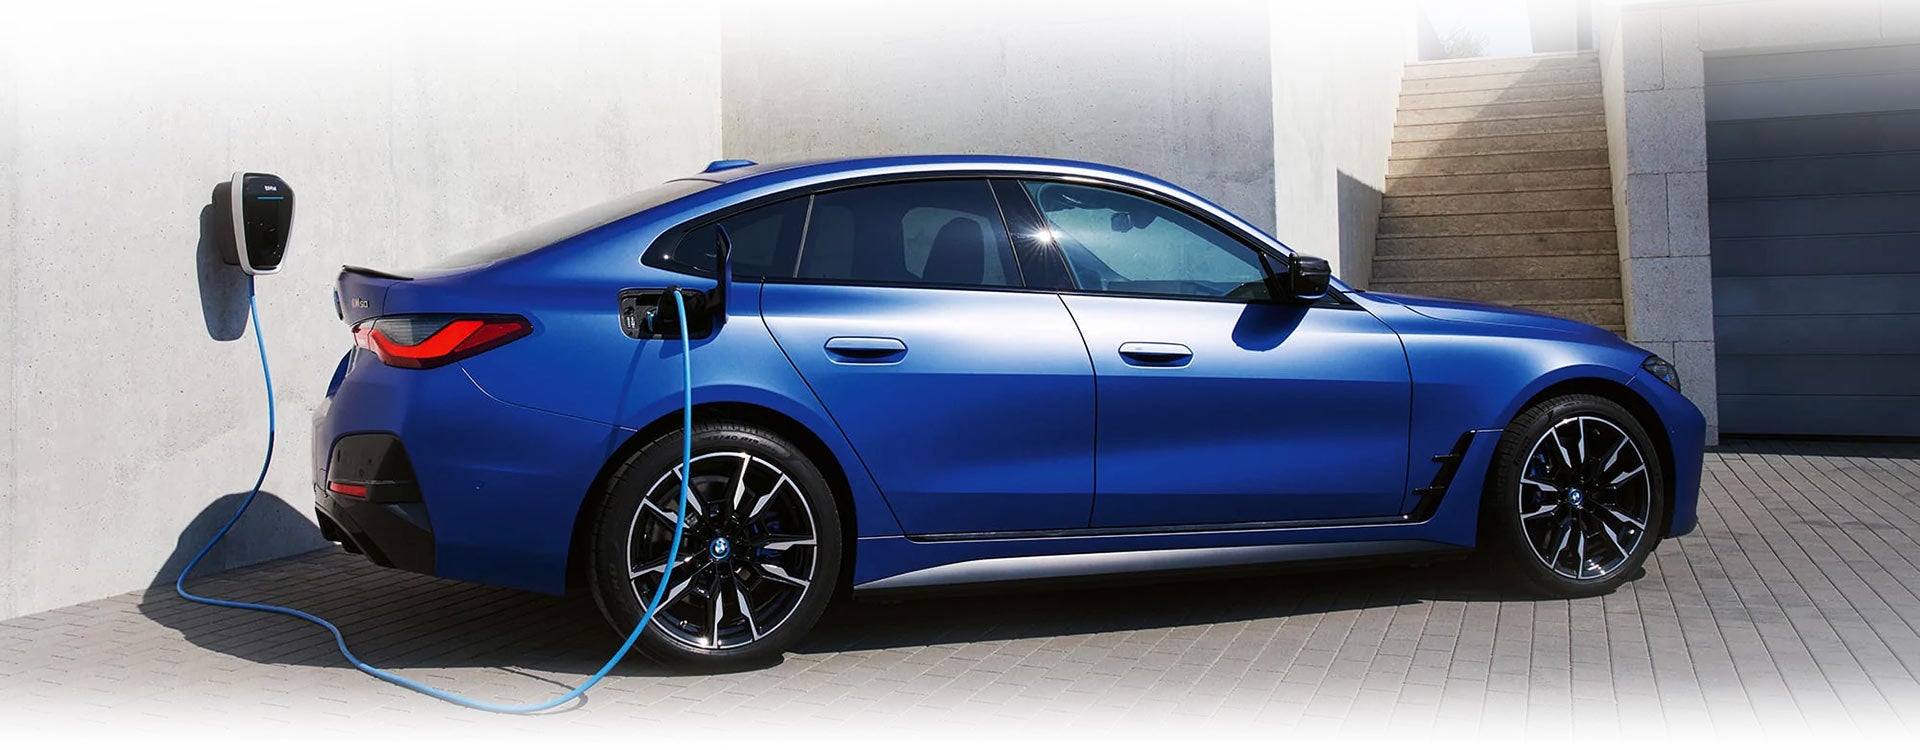 The First-Ever BMW i4 charging at a BMW Wallbox | BMW of Palm Springs in Palm Springs CA